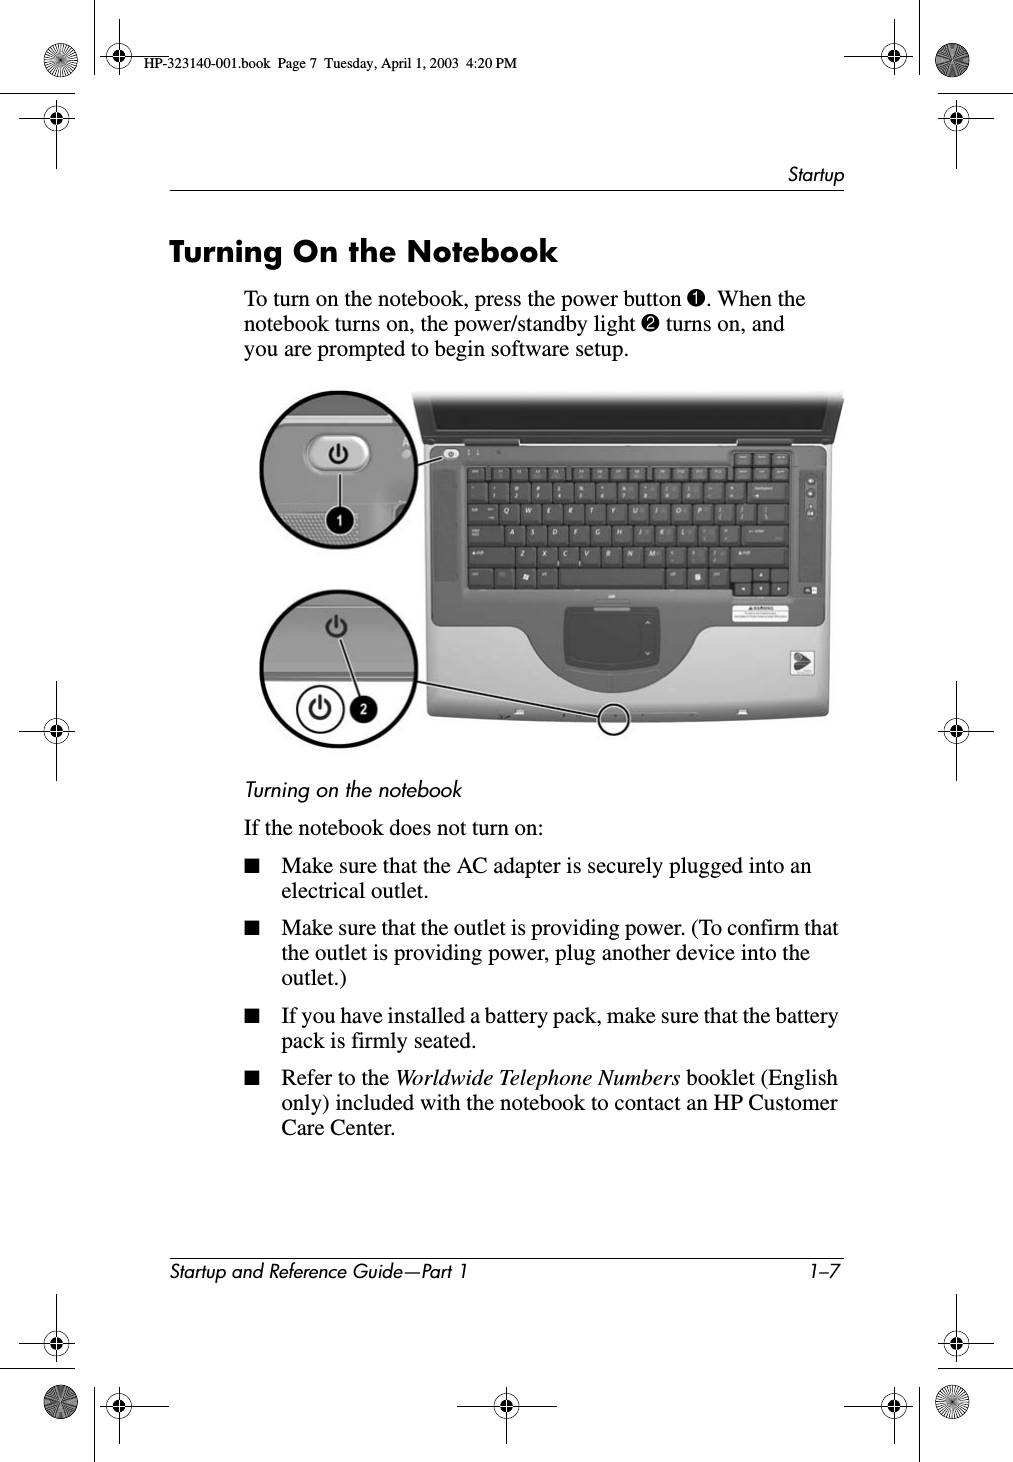 StartupStartup and Reference Guide—Part 1 1–7Turning On the NotebookTo turn on the notebook, press the power button 1. When the notebook turns on, the power/standby light 2 turns on, and you are prompted to begin software setup.Turning on the notebookIf the notebook does not turn on:■Make sure that the AC adapter is securely plugged into an electrical outlet.■Make sure that the outlet is providing power. (To confirm that the outlet is providing power, plug another device into the outlet.)■If you have installed a battery pack, make sure that the battery pack is firmly seated.■Refer to the Worldwide Telephone Numbers booklet (English only) included with the notebook to contact an HP Customer Care Center.HP-323140-001.book  Page 7  Tuesday, April 1, 2003  4:20 PM